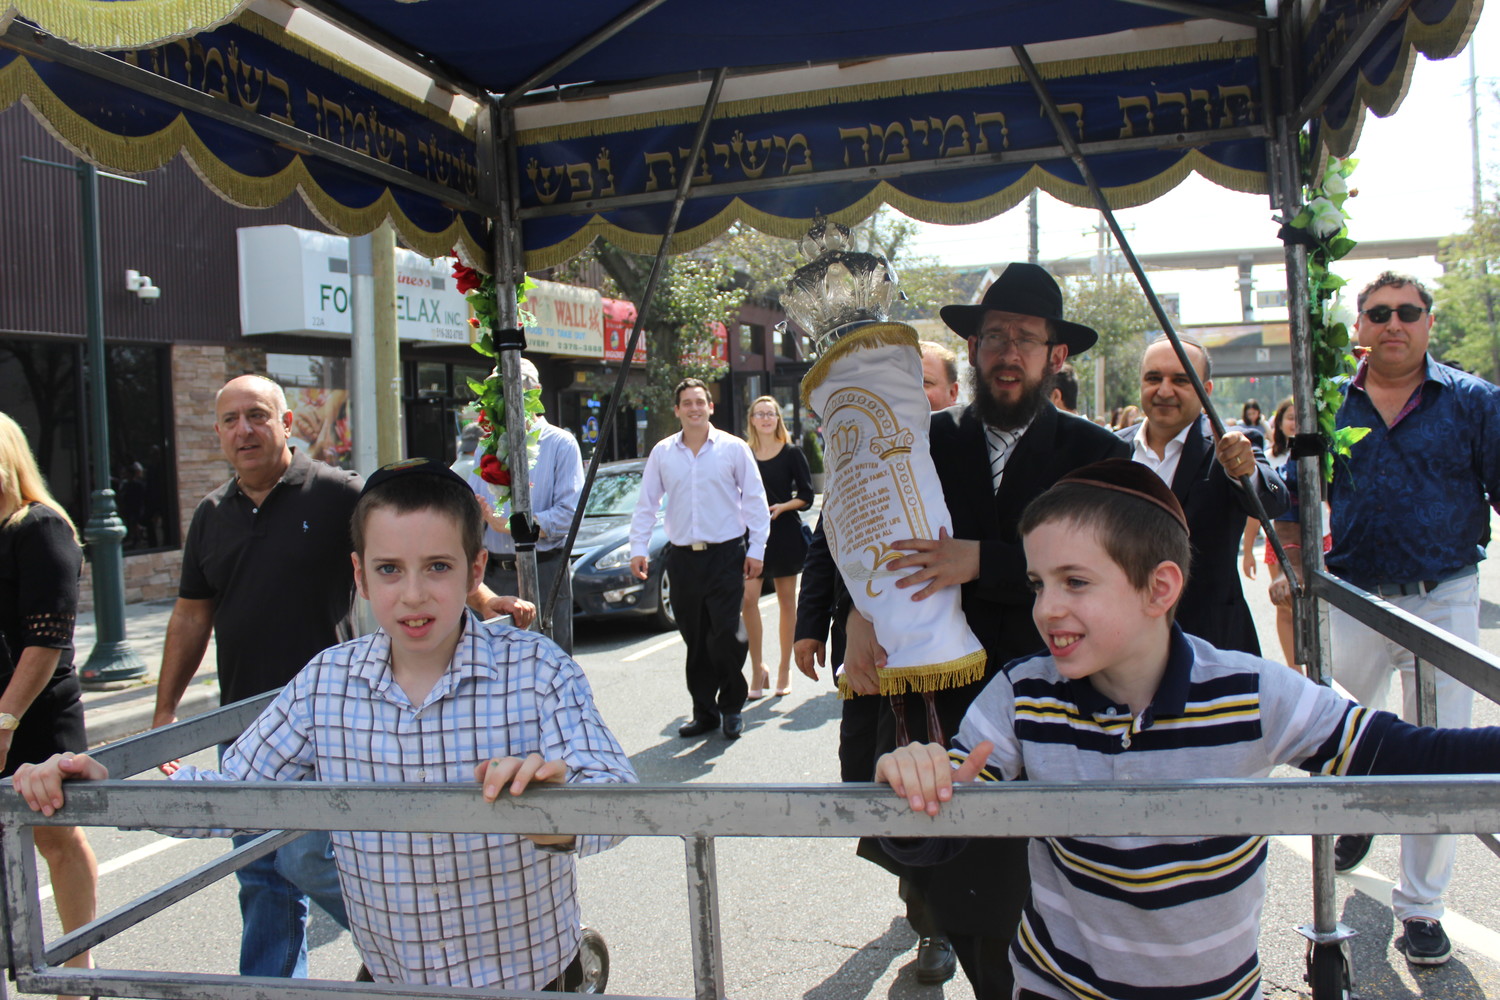 Rabbi Shimon Kramer, of the Chabad Center for Jewish Life in Merrick, marched up Merrick Avenue with his congregation’s new Torah scroll when it was unveiled this fall. His sons Binyamin and Leibel, both 10, joined him.